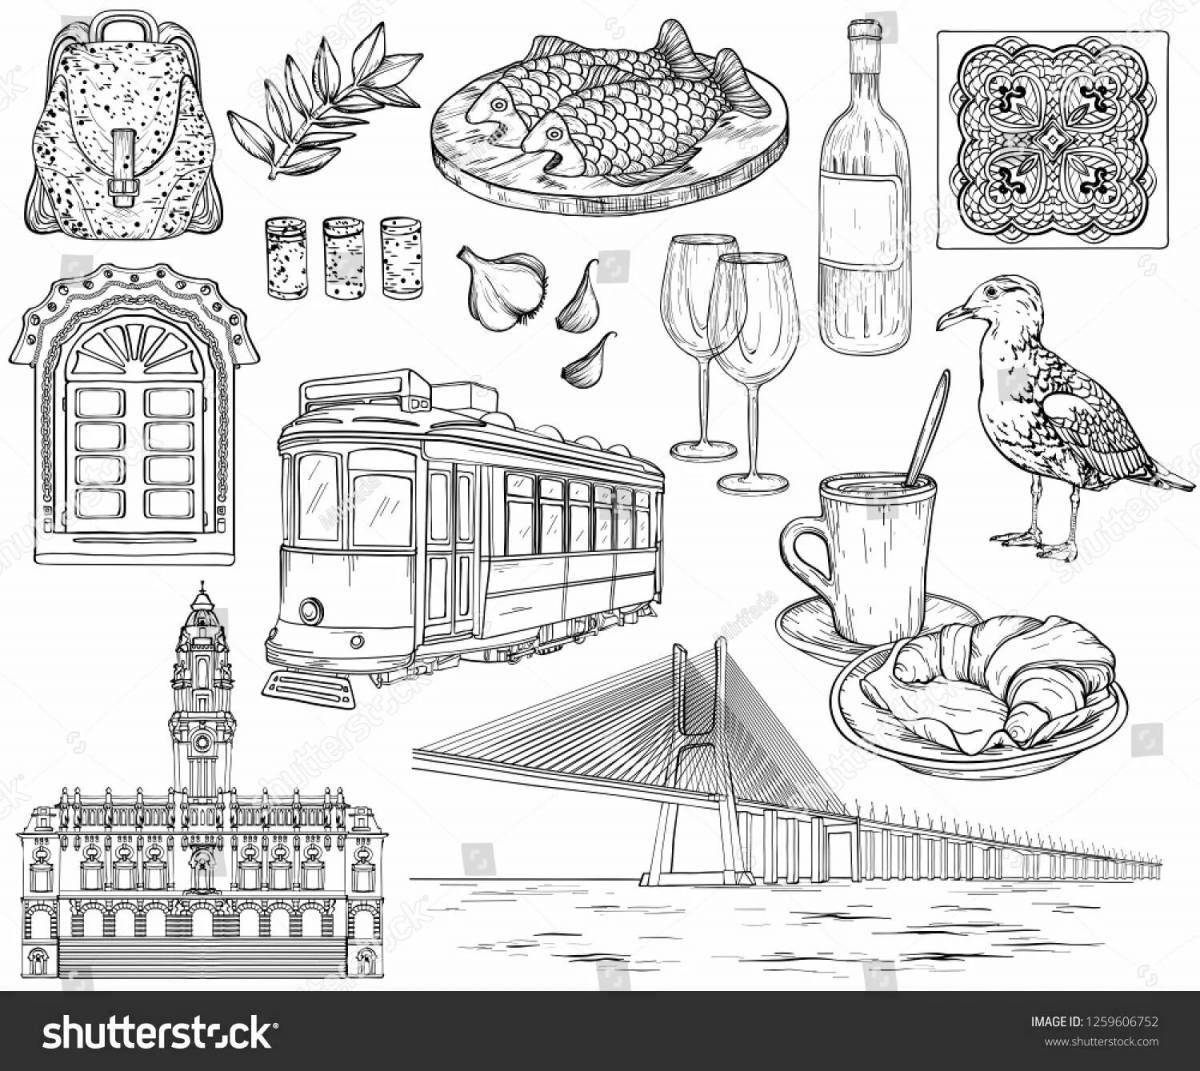 Glorious portugal coloring page